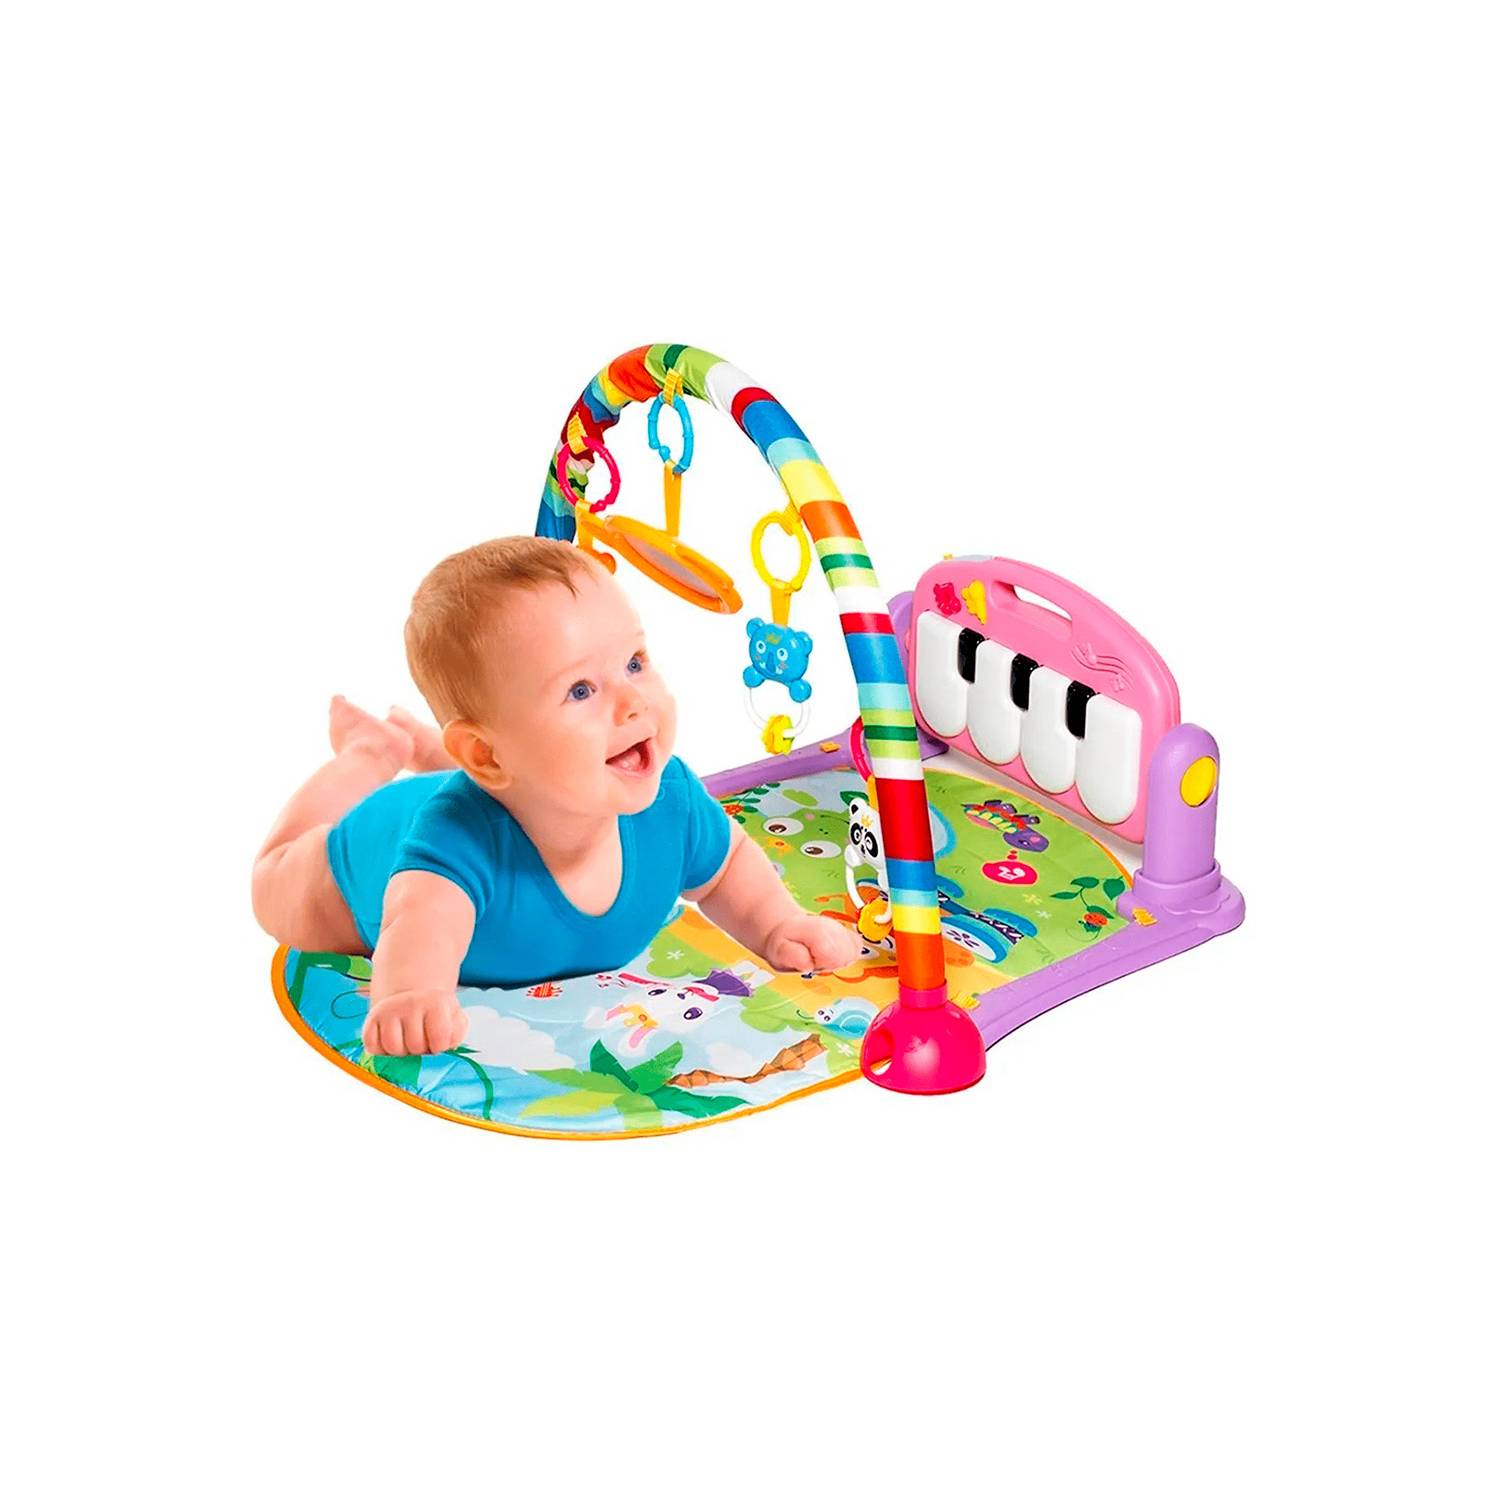 Gimnasio Bebe Tapete Piano Musical Luces y sonido